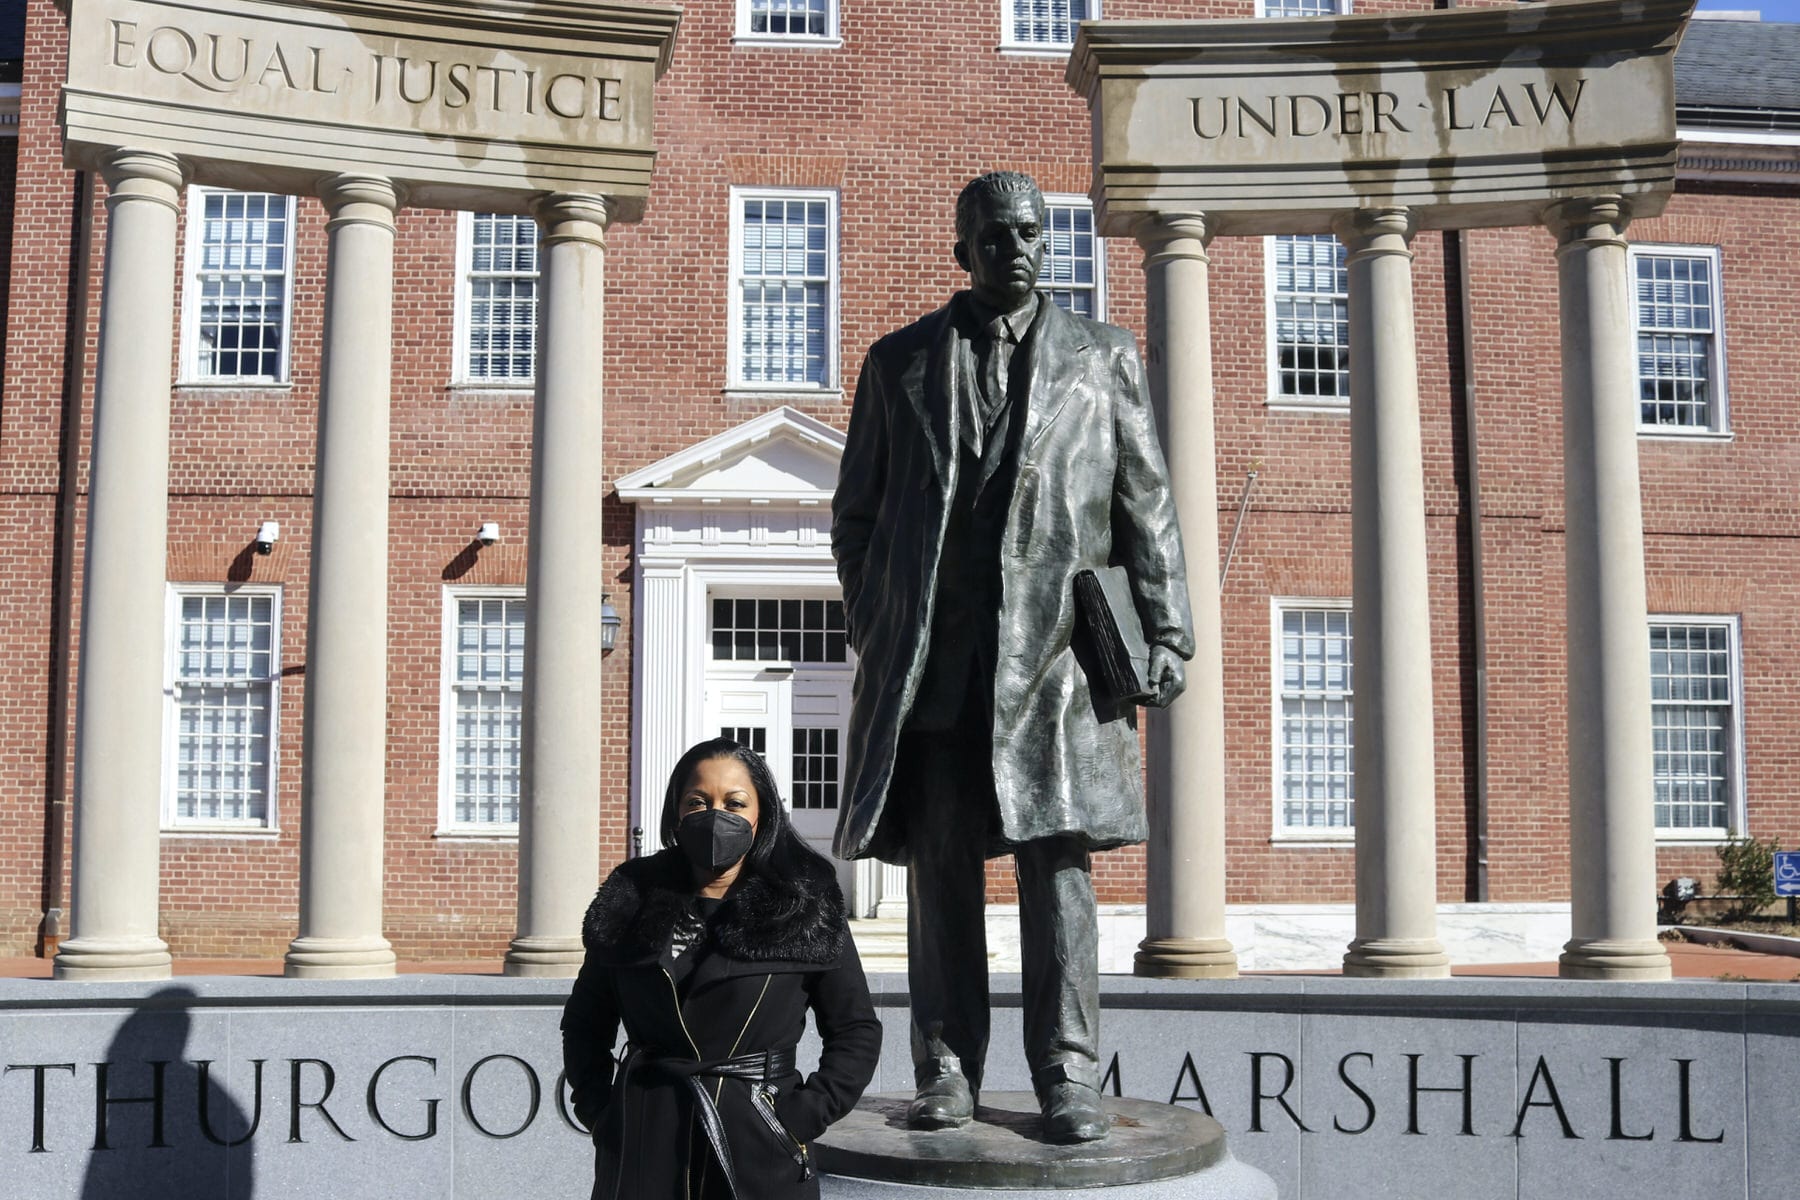 Maryland Del. Vanessa Atterbeary stands in front of a statue of Thurgood Marshall.